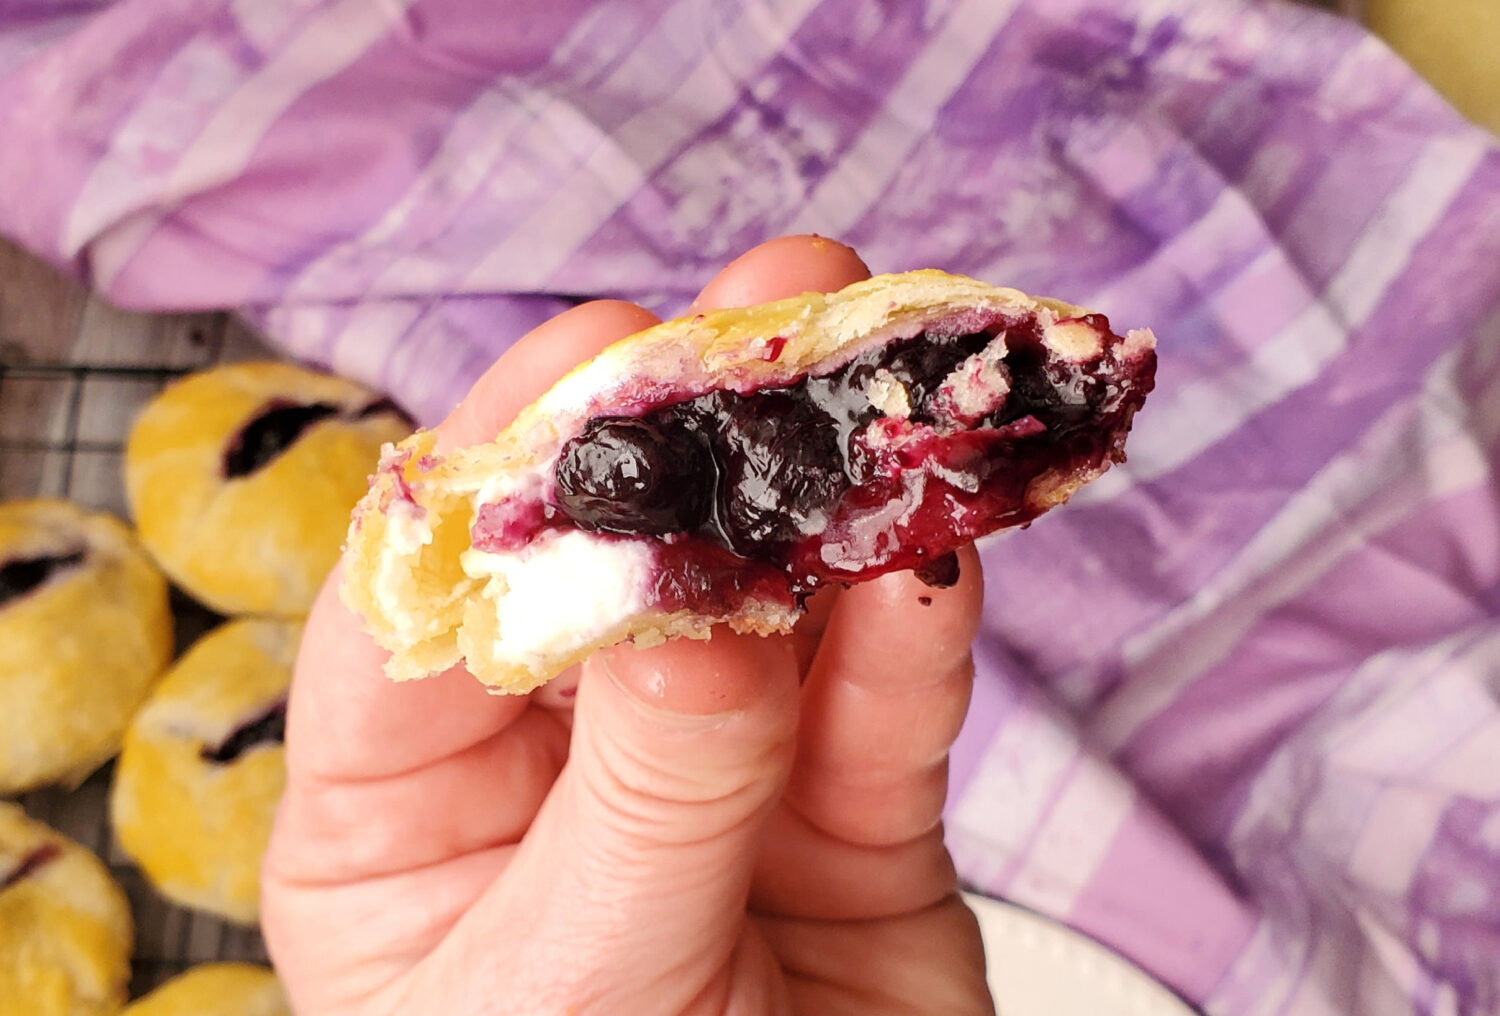 Blueberry Cream Pie Poppers are the perfect two-bite luscious berry mini pies that are easy to make, same buttery flaky crust, snack size.  Half the amount of crust of hand pies, but all the filling crammed into a mini!